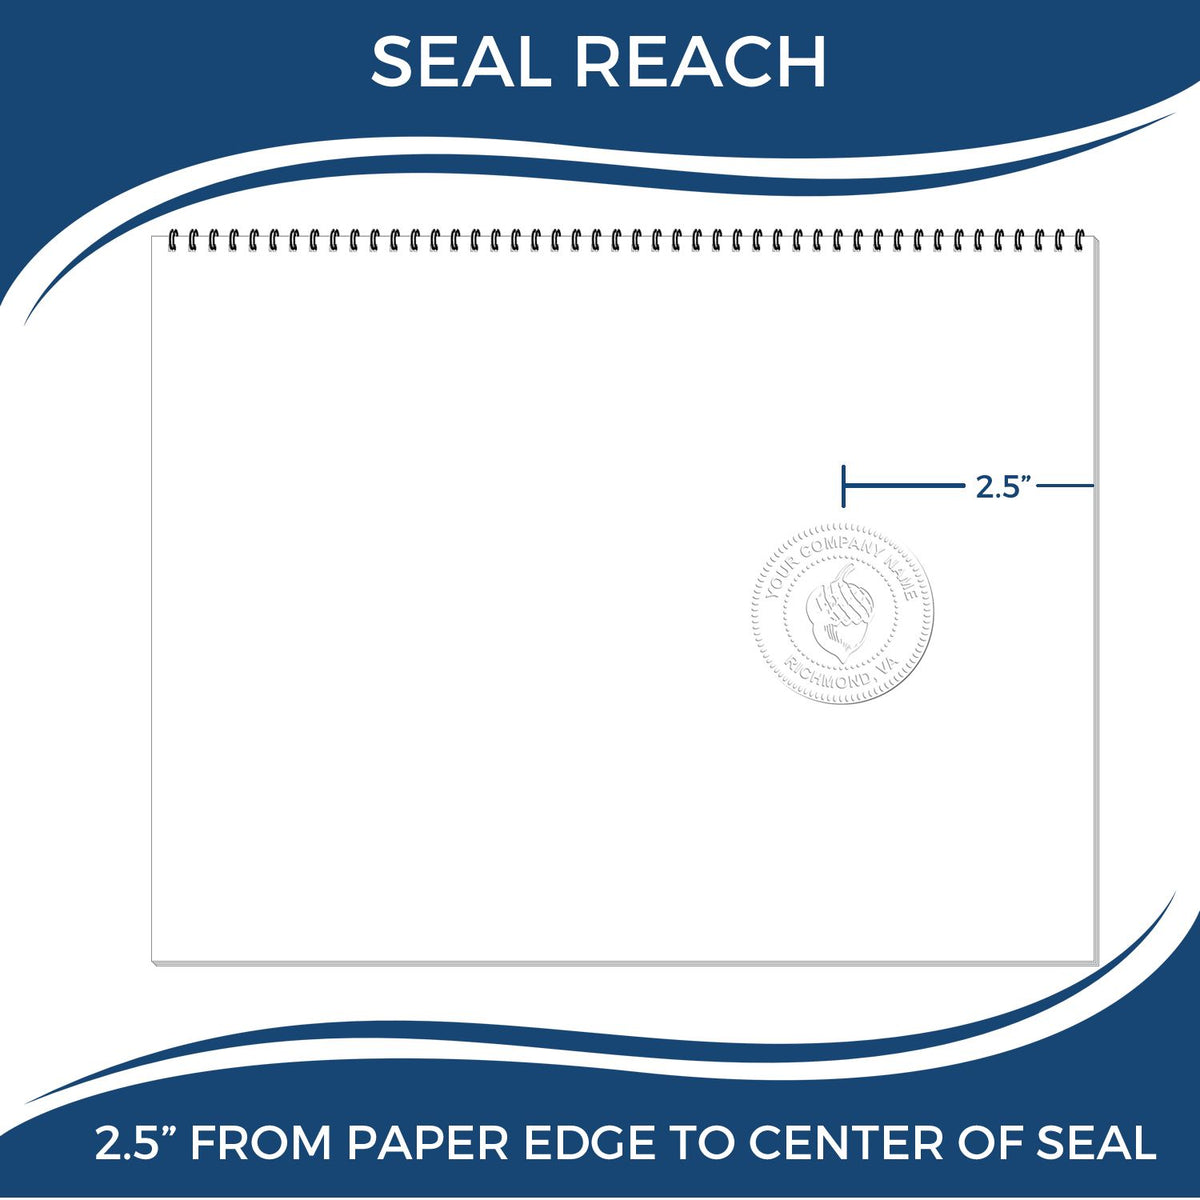 An infographic showing the seal reach which is represented by a ruler and a miniature seal image of the Long Reach South Carolina PE Seal